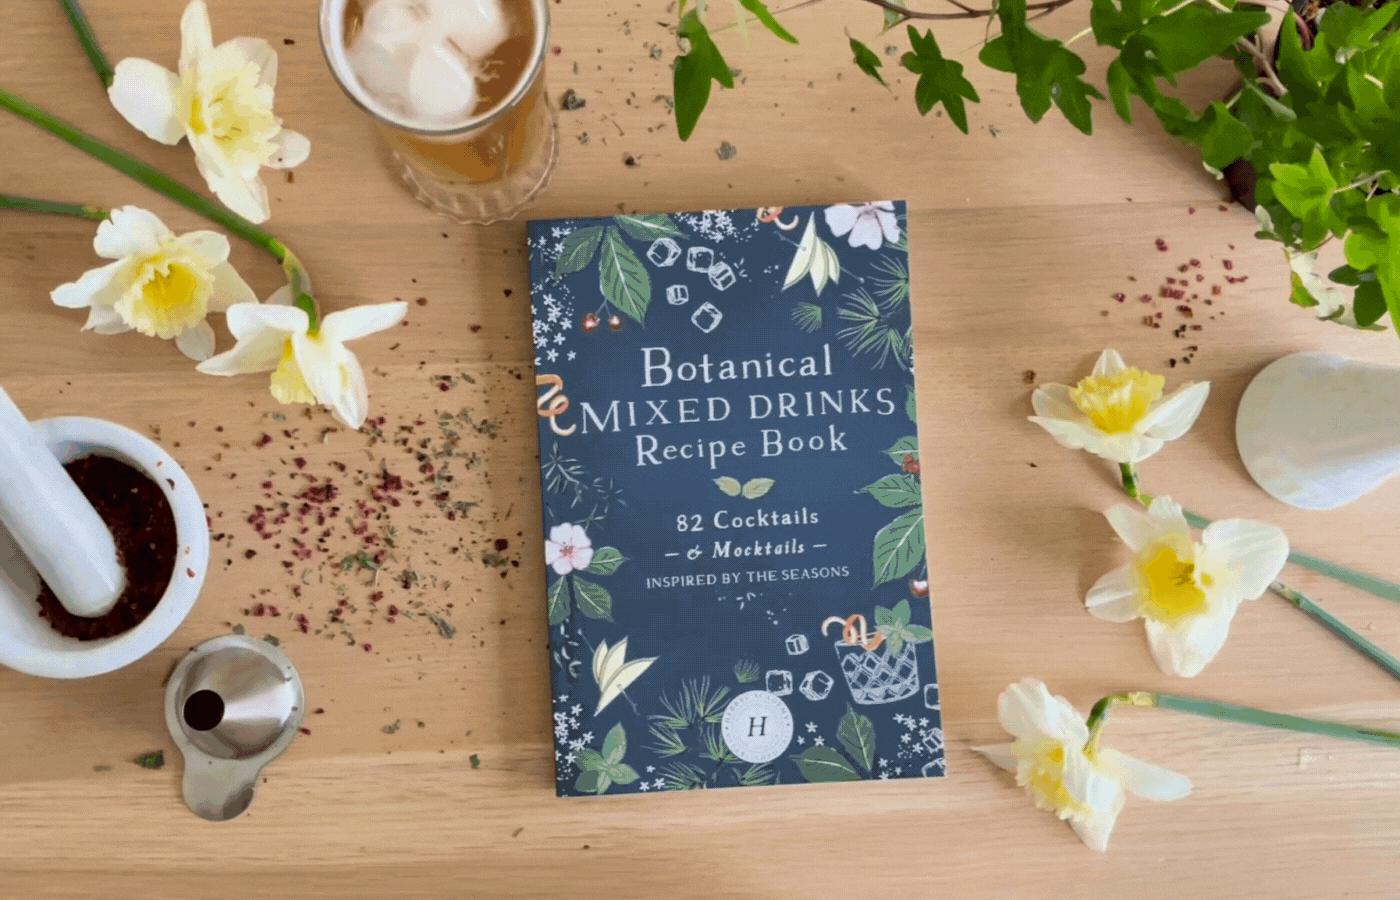 Herbal Academy's Botanical Mixed Drinks Recipe Book – craft 82 Botanical Cocktails and Mocktails inspired by the seasons